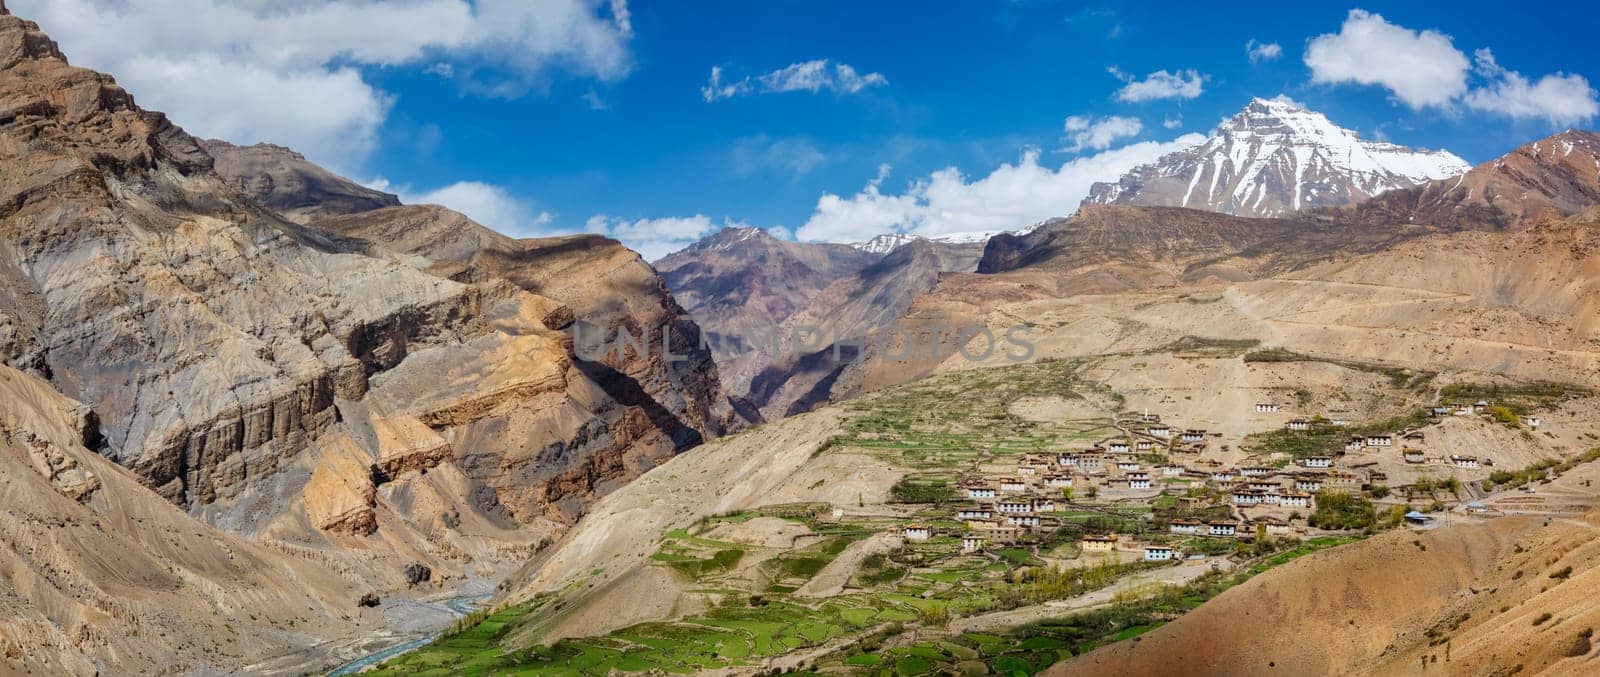 Panorama of Spiti valley and Kibber village in Himalayas. Spiti Valley, Himachal Pradesh, India